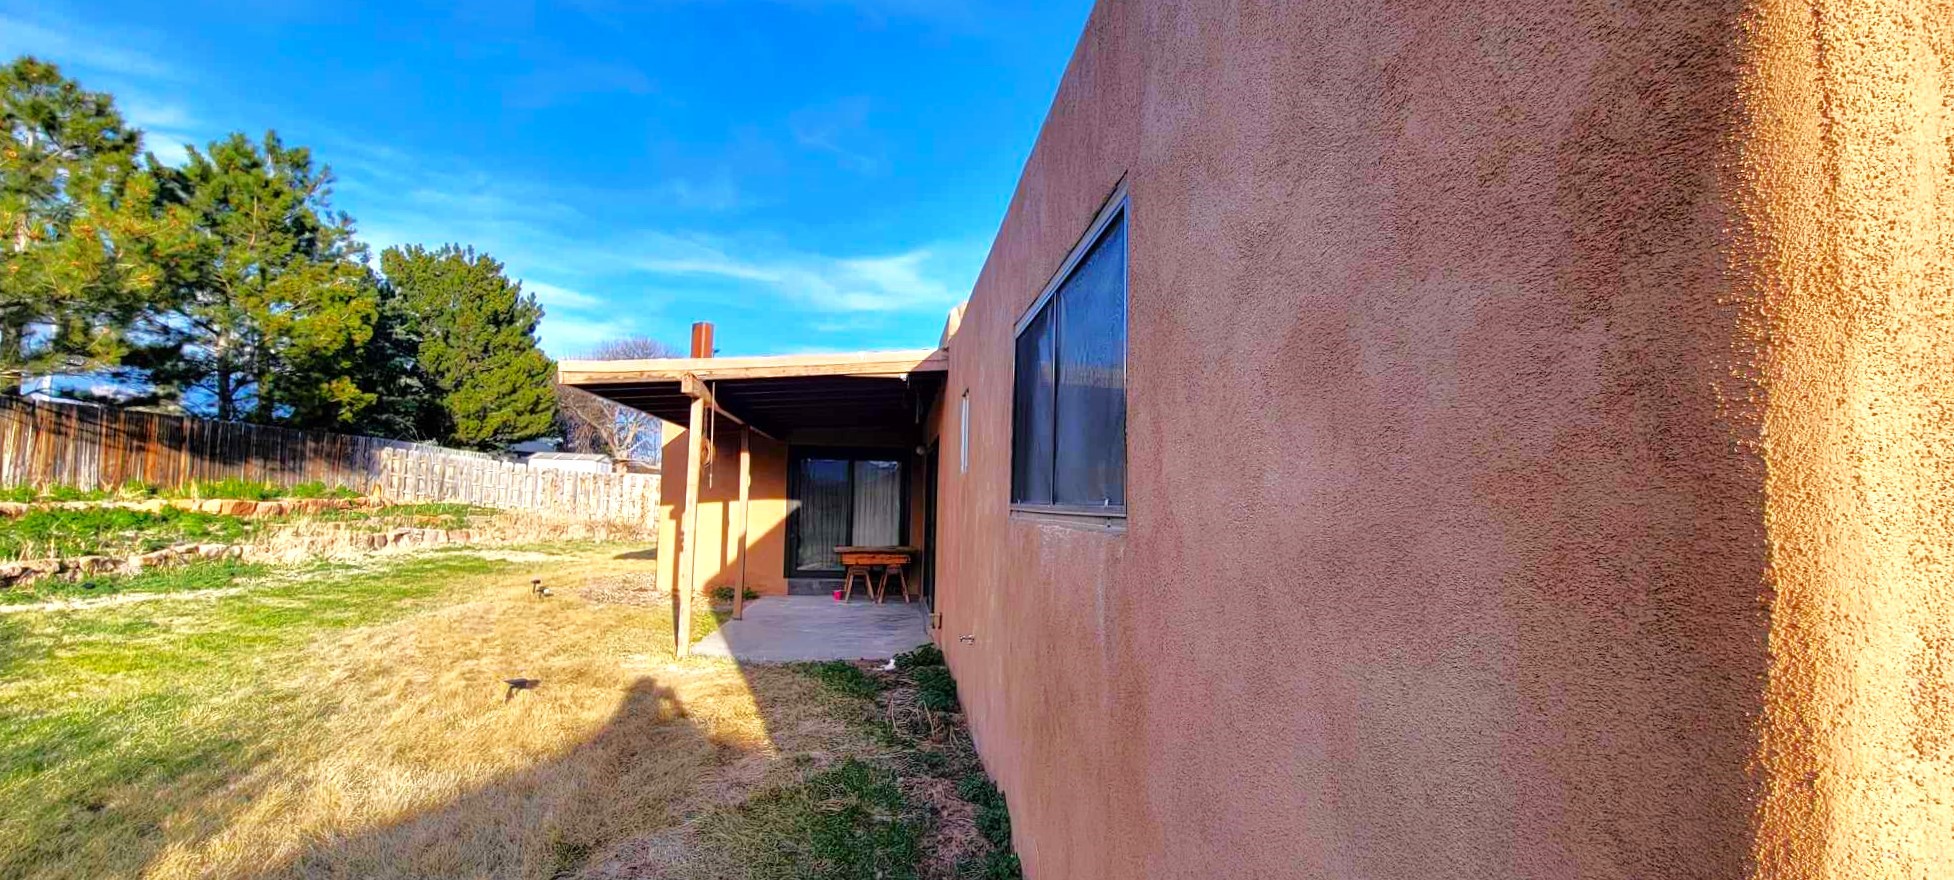 410 Rover Boulevard, White Rock, New Mexico 87547, 4 Bedrooms Bedrooms, ,2 BathroomsBathrooms,Residential,For Sale,410 Rover Boulevard,202401079